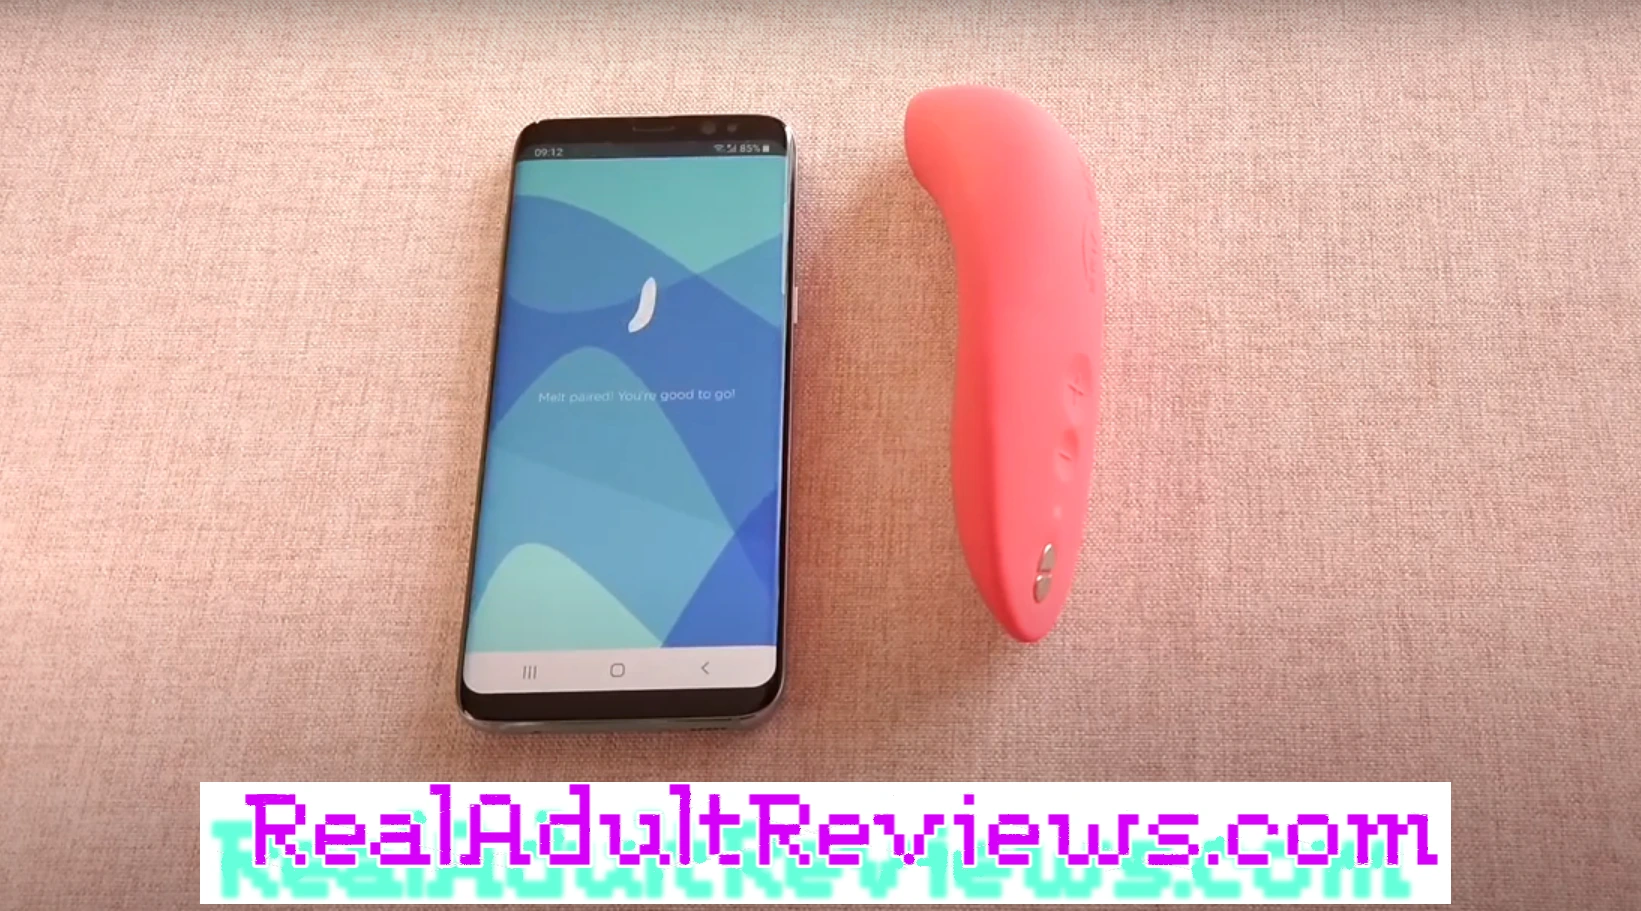 We-Vibe Melt Review: Looking for a Way to Diversify Sex?